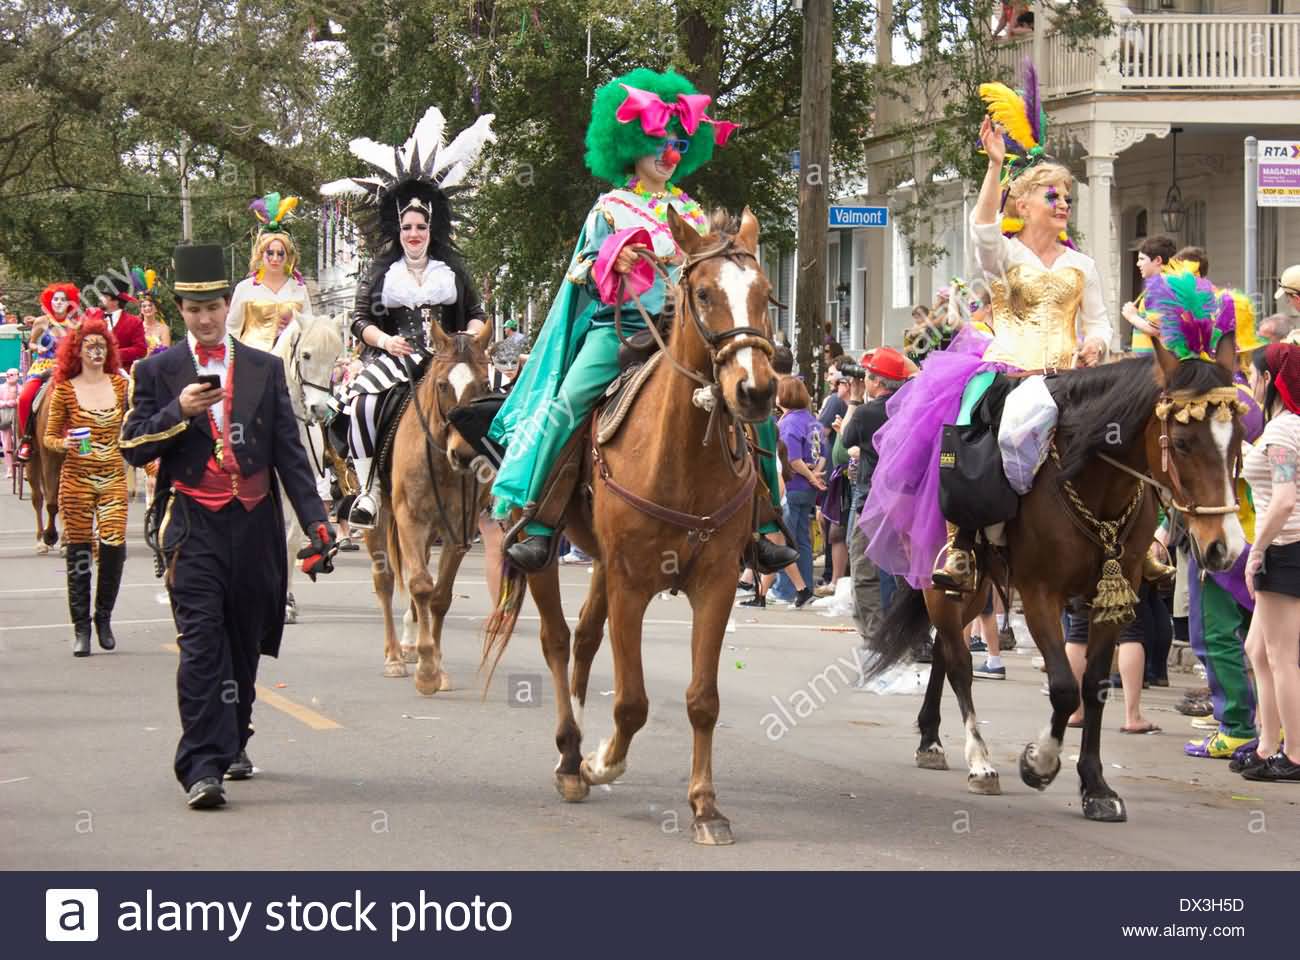 Ladies In Costumes Riding Horses In A Mardi Gras Parade In New Orleans, Los Angeles